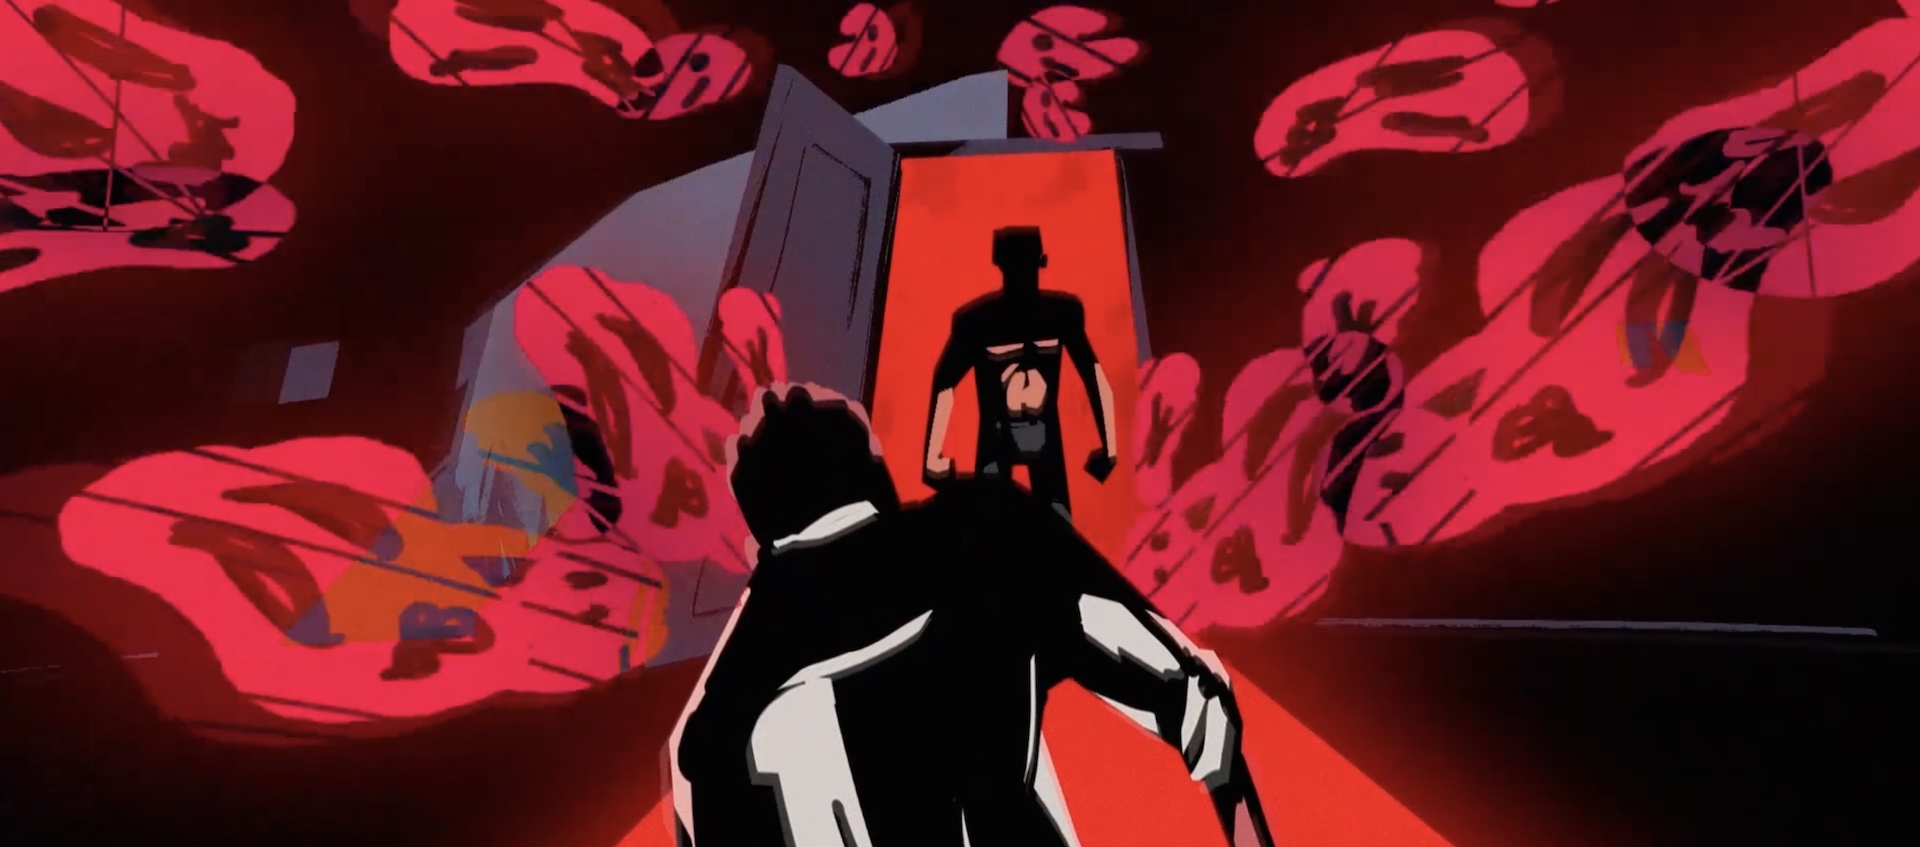 An animated scene of a man in a room full of red abstract shapes in the air, seen in the foreground with his back to the viewer, facing a man in the background who's standing in the doorway in silhouette, red light filling the space behind him